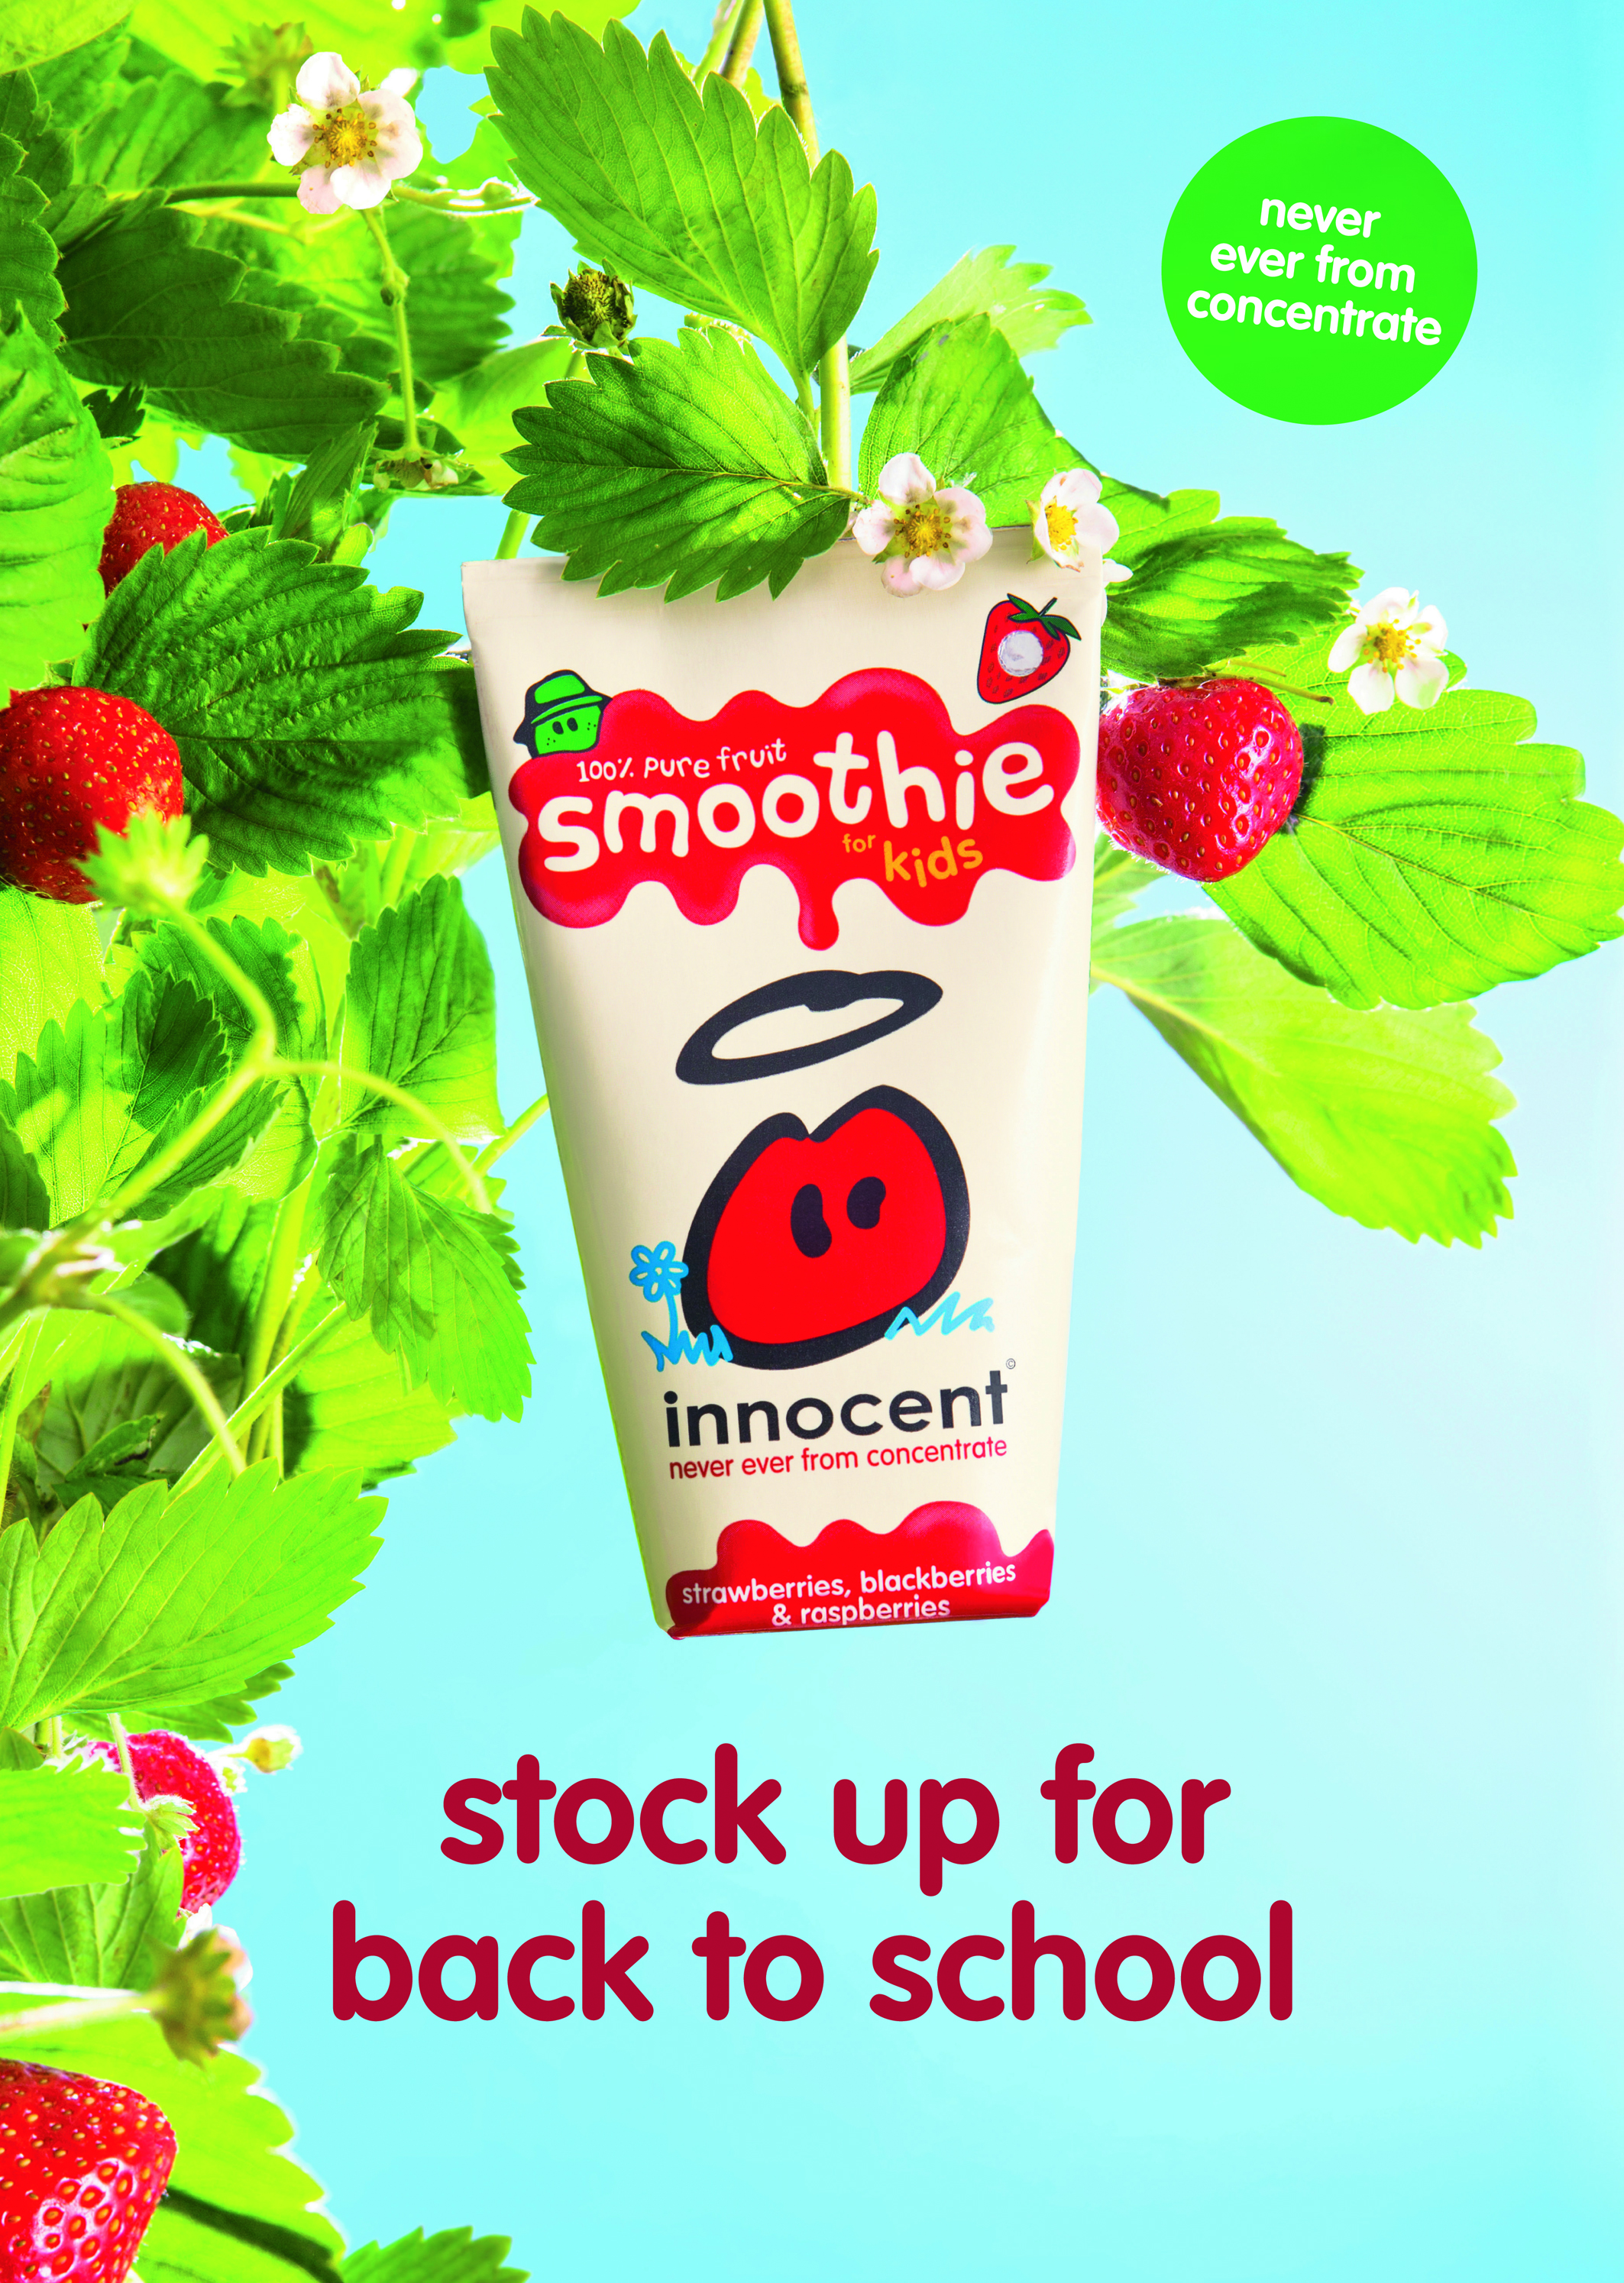 Innocent leads the kids smoothie market with 85% market share